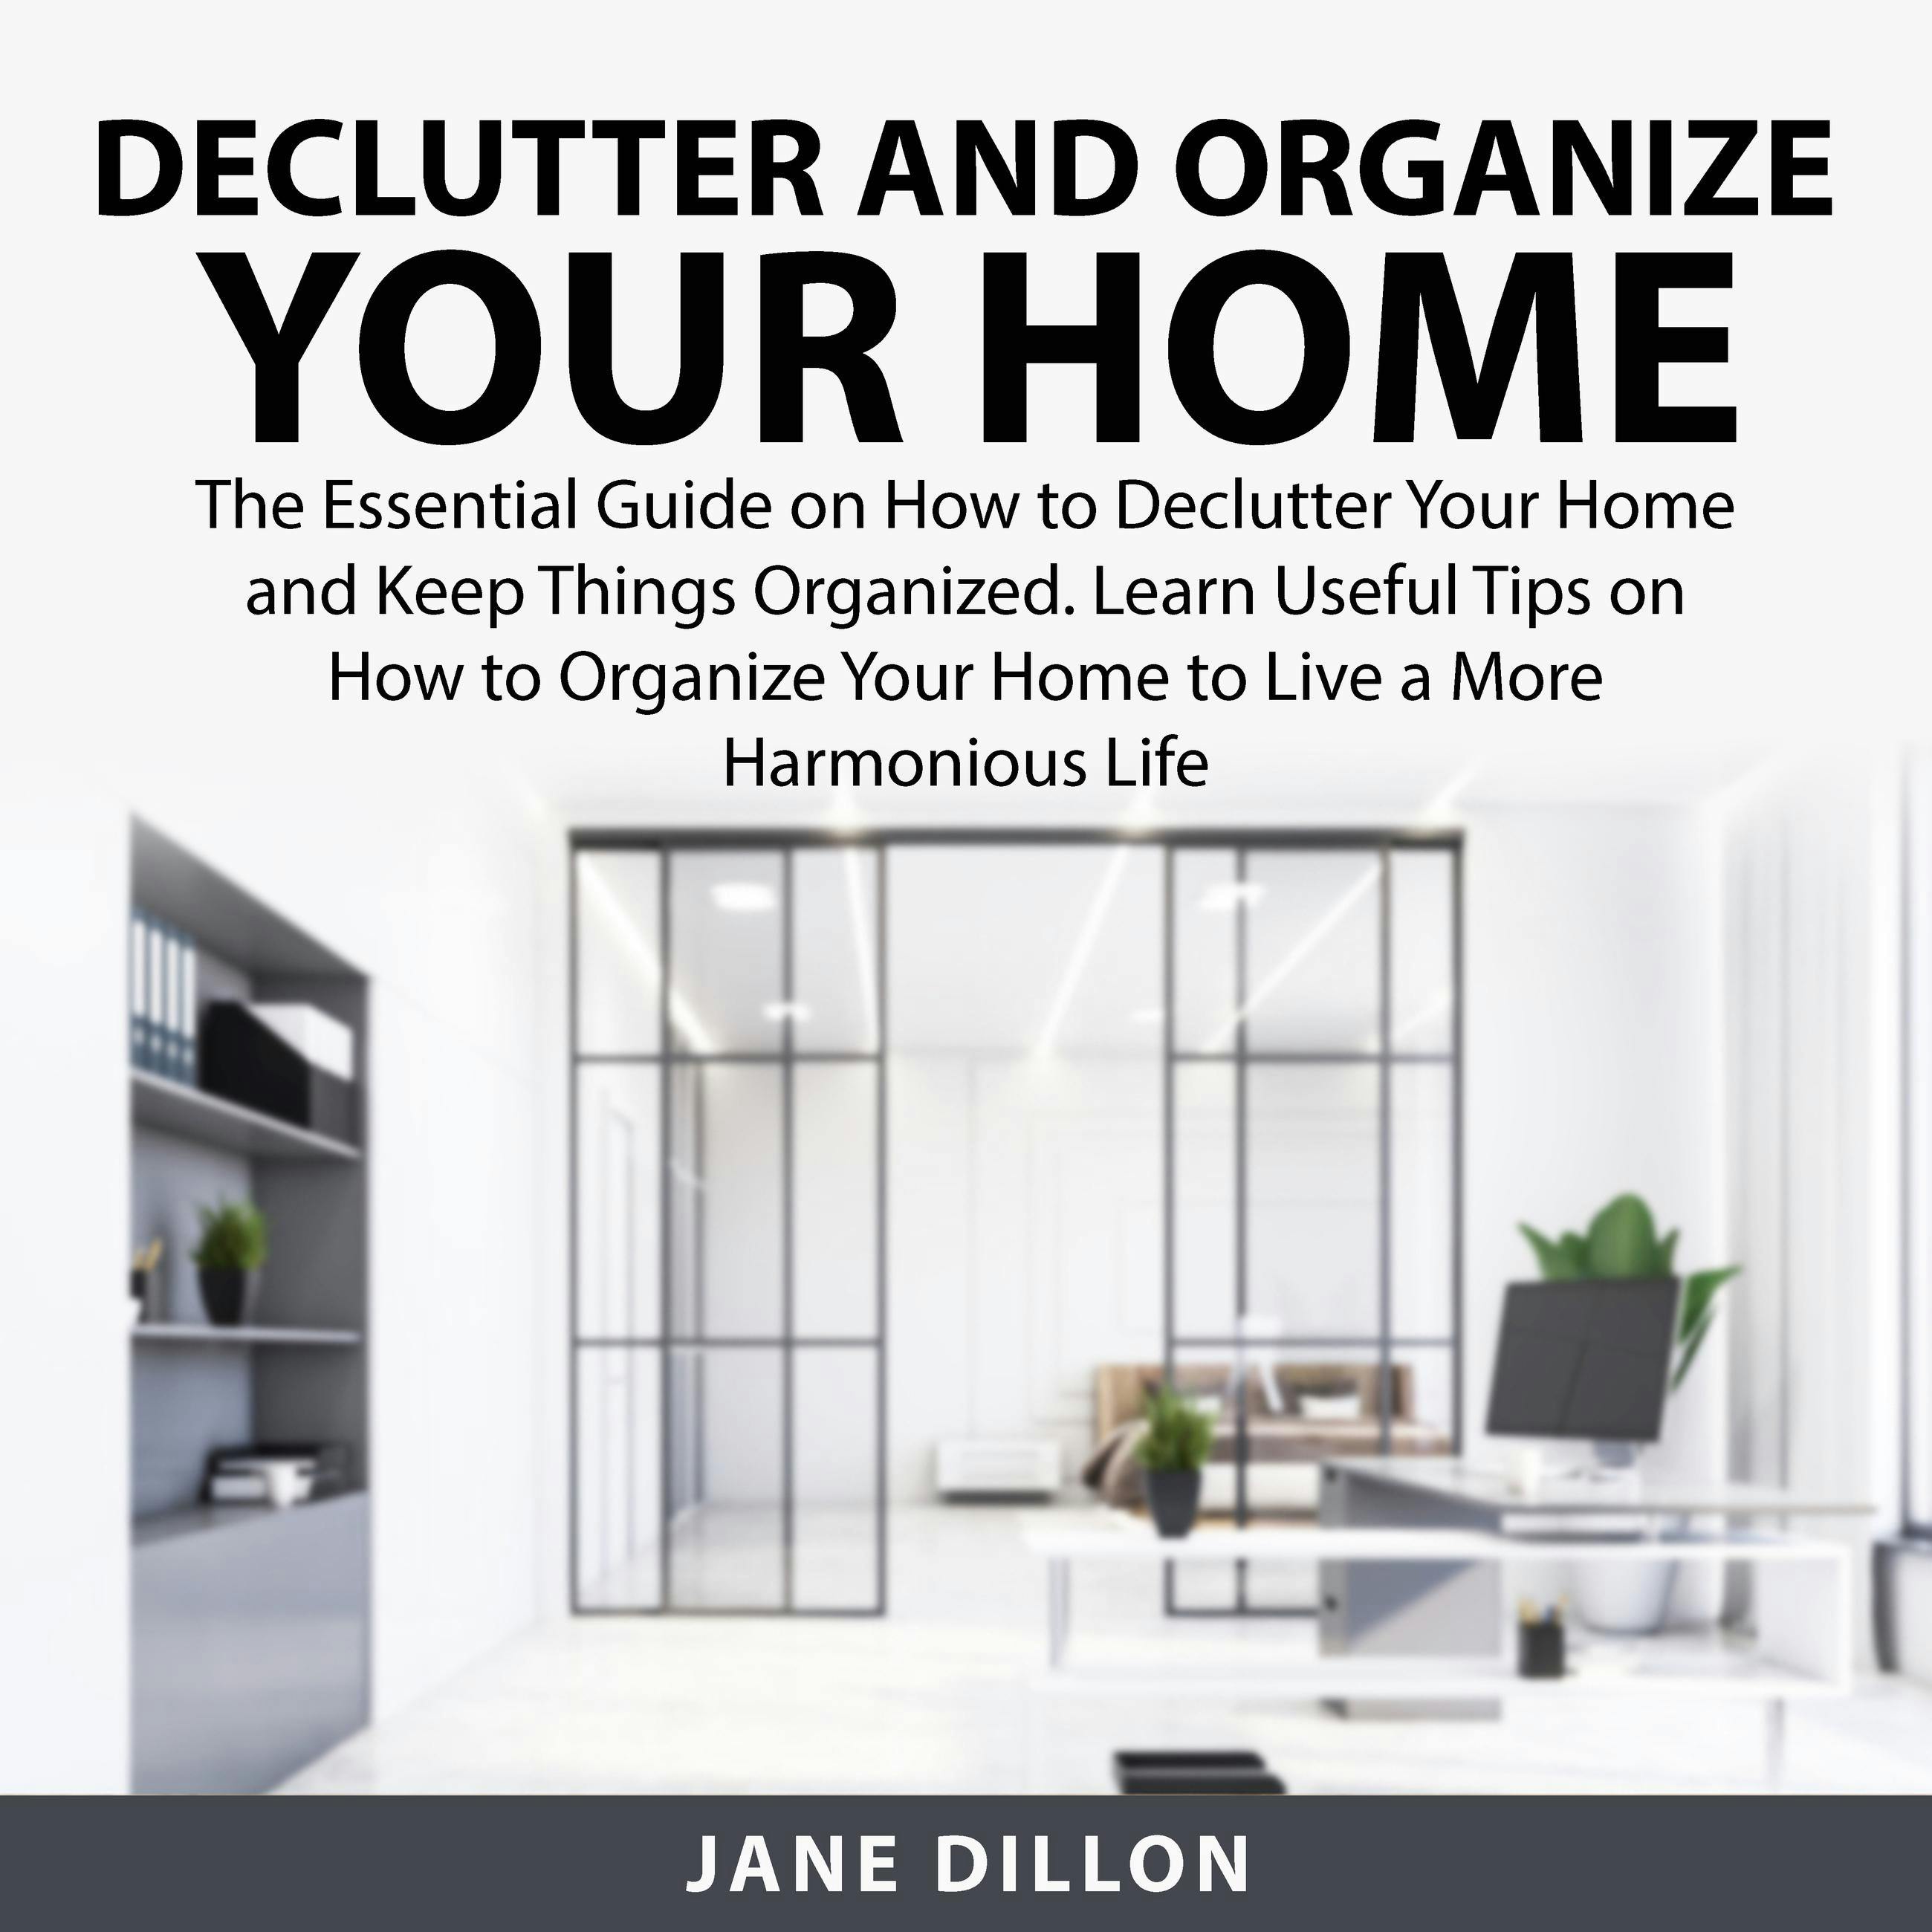 Declutter and Organize Your Home: The Essential Guide on How to Declutter Your Home and Keep Things Organized. Learn Useful Tips on How to Organized Your Home to Live a More Harmonious Life - Jane Dillon